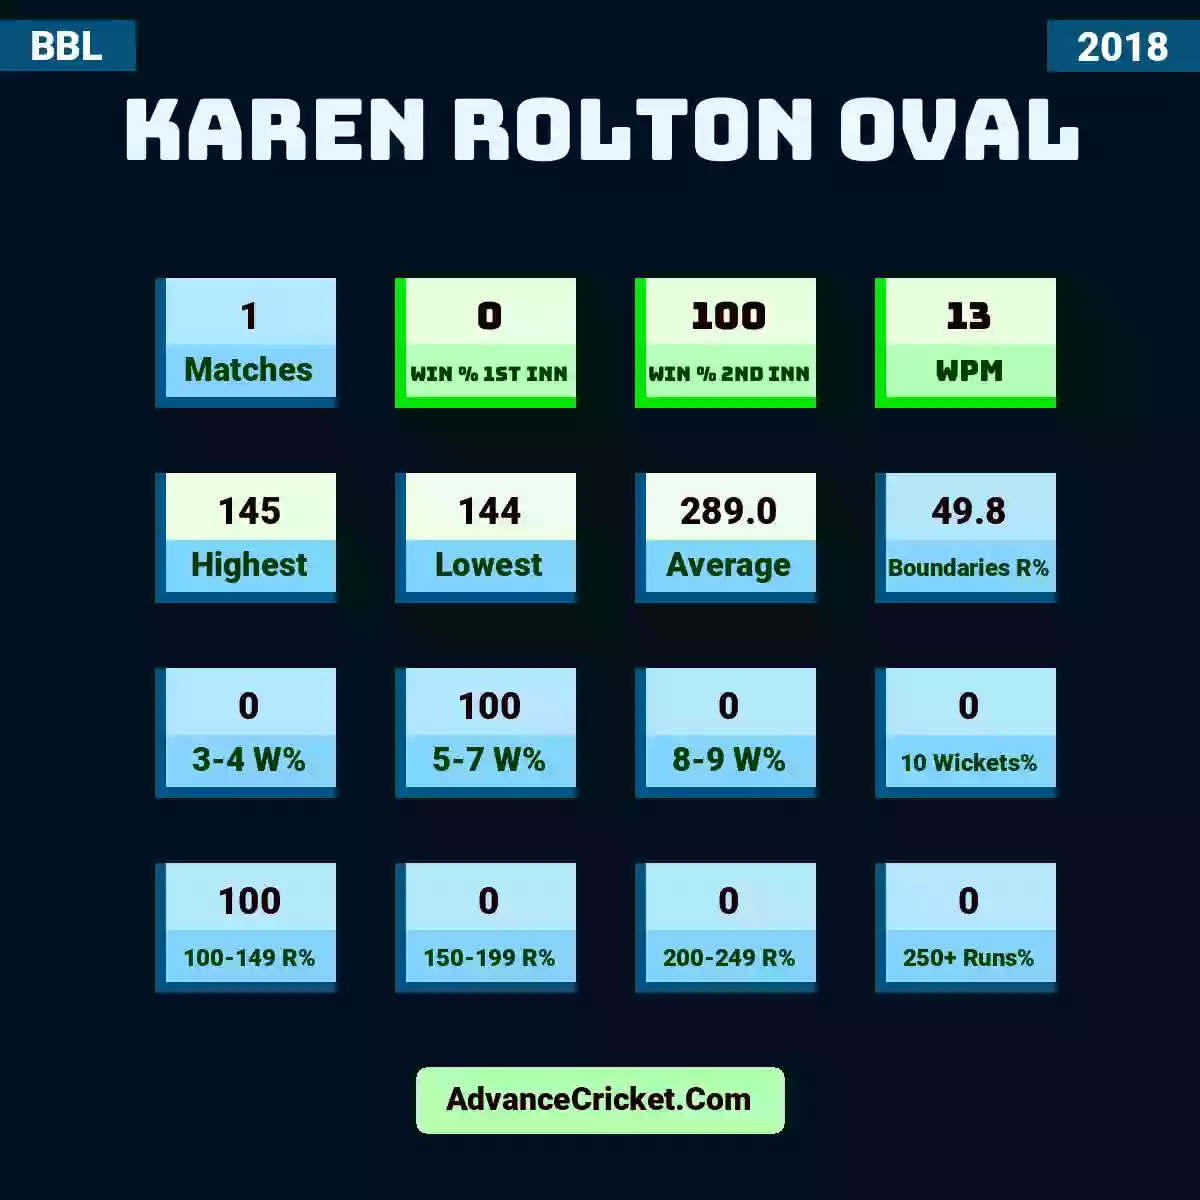 Image showing Karen Rolton Oval with Matches: 1, Win % 1st Inn: 0, Win % 2nd Inn: 100, WPM: 13, Highest: 145, Lowest: 144, Average: 289.0, Boundaries R%: 49.8, 3-4 W%: 0, 5-7 W%: 100, 8-9 W%: 0, 10 Wickets%: 0, 100-149 R%: 100, 150-199 R%: 0, 200-249 R%: 0, 250+ Runs%: 0.